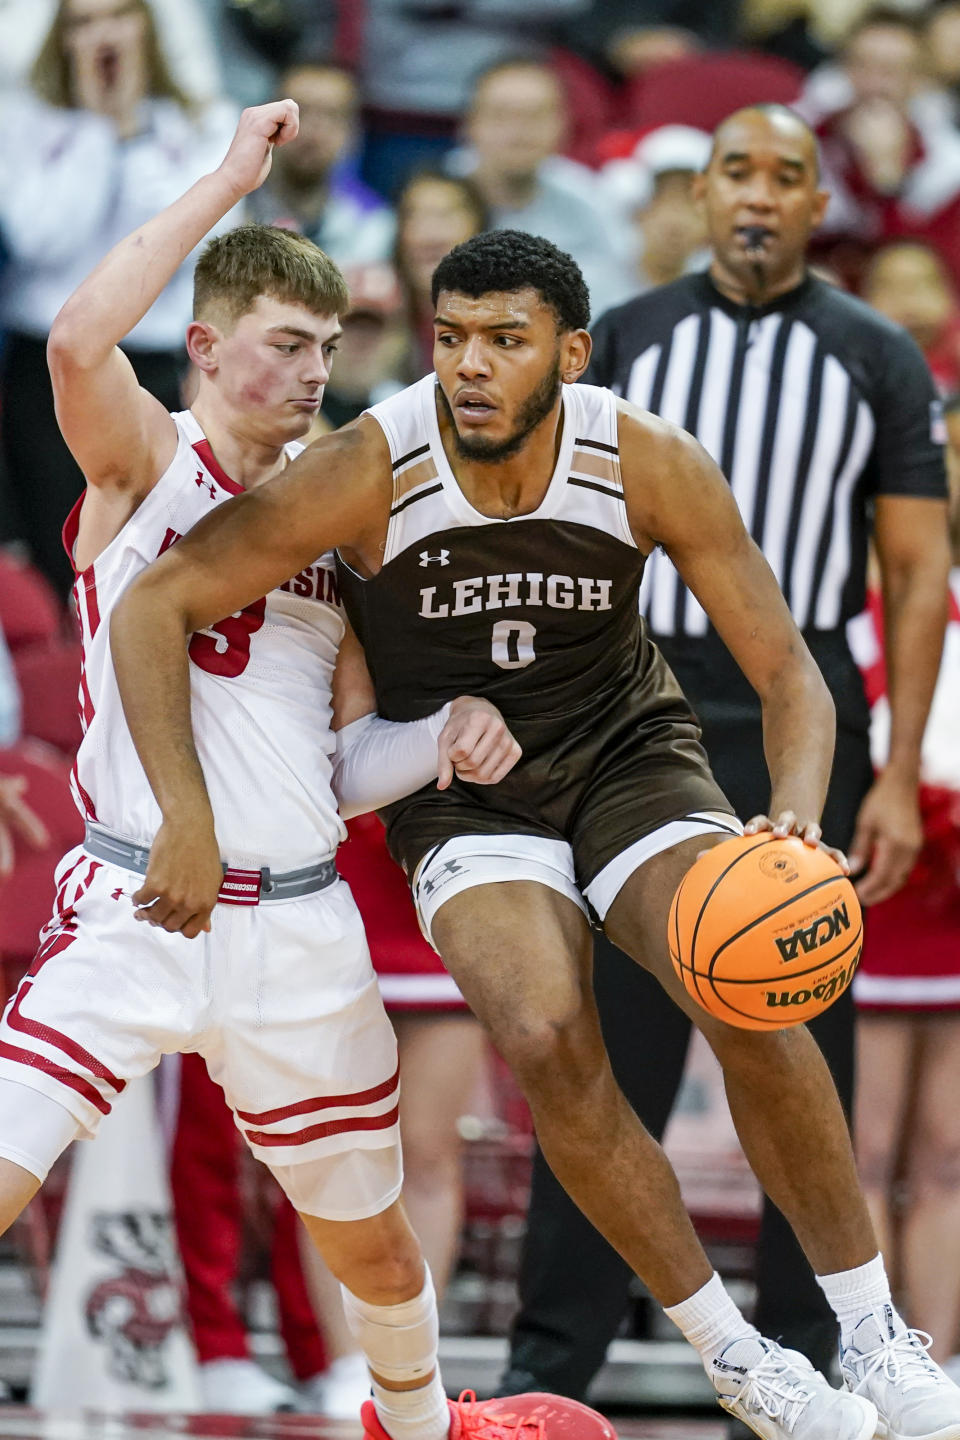 Lehigh's Jakob Alamudun (0) drives against Wisconsin's Connor Essegian (3) during the second half of an NCAA college basketball game Thursday, Dec. 15, 2022, in Madison, Wis. (AP Photo/Andy Manis)